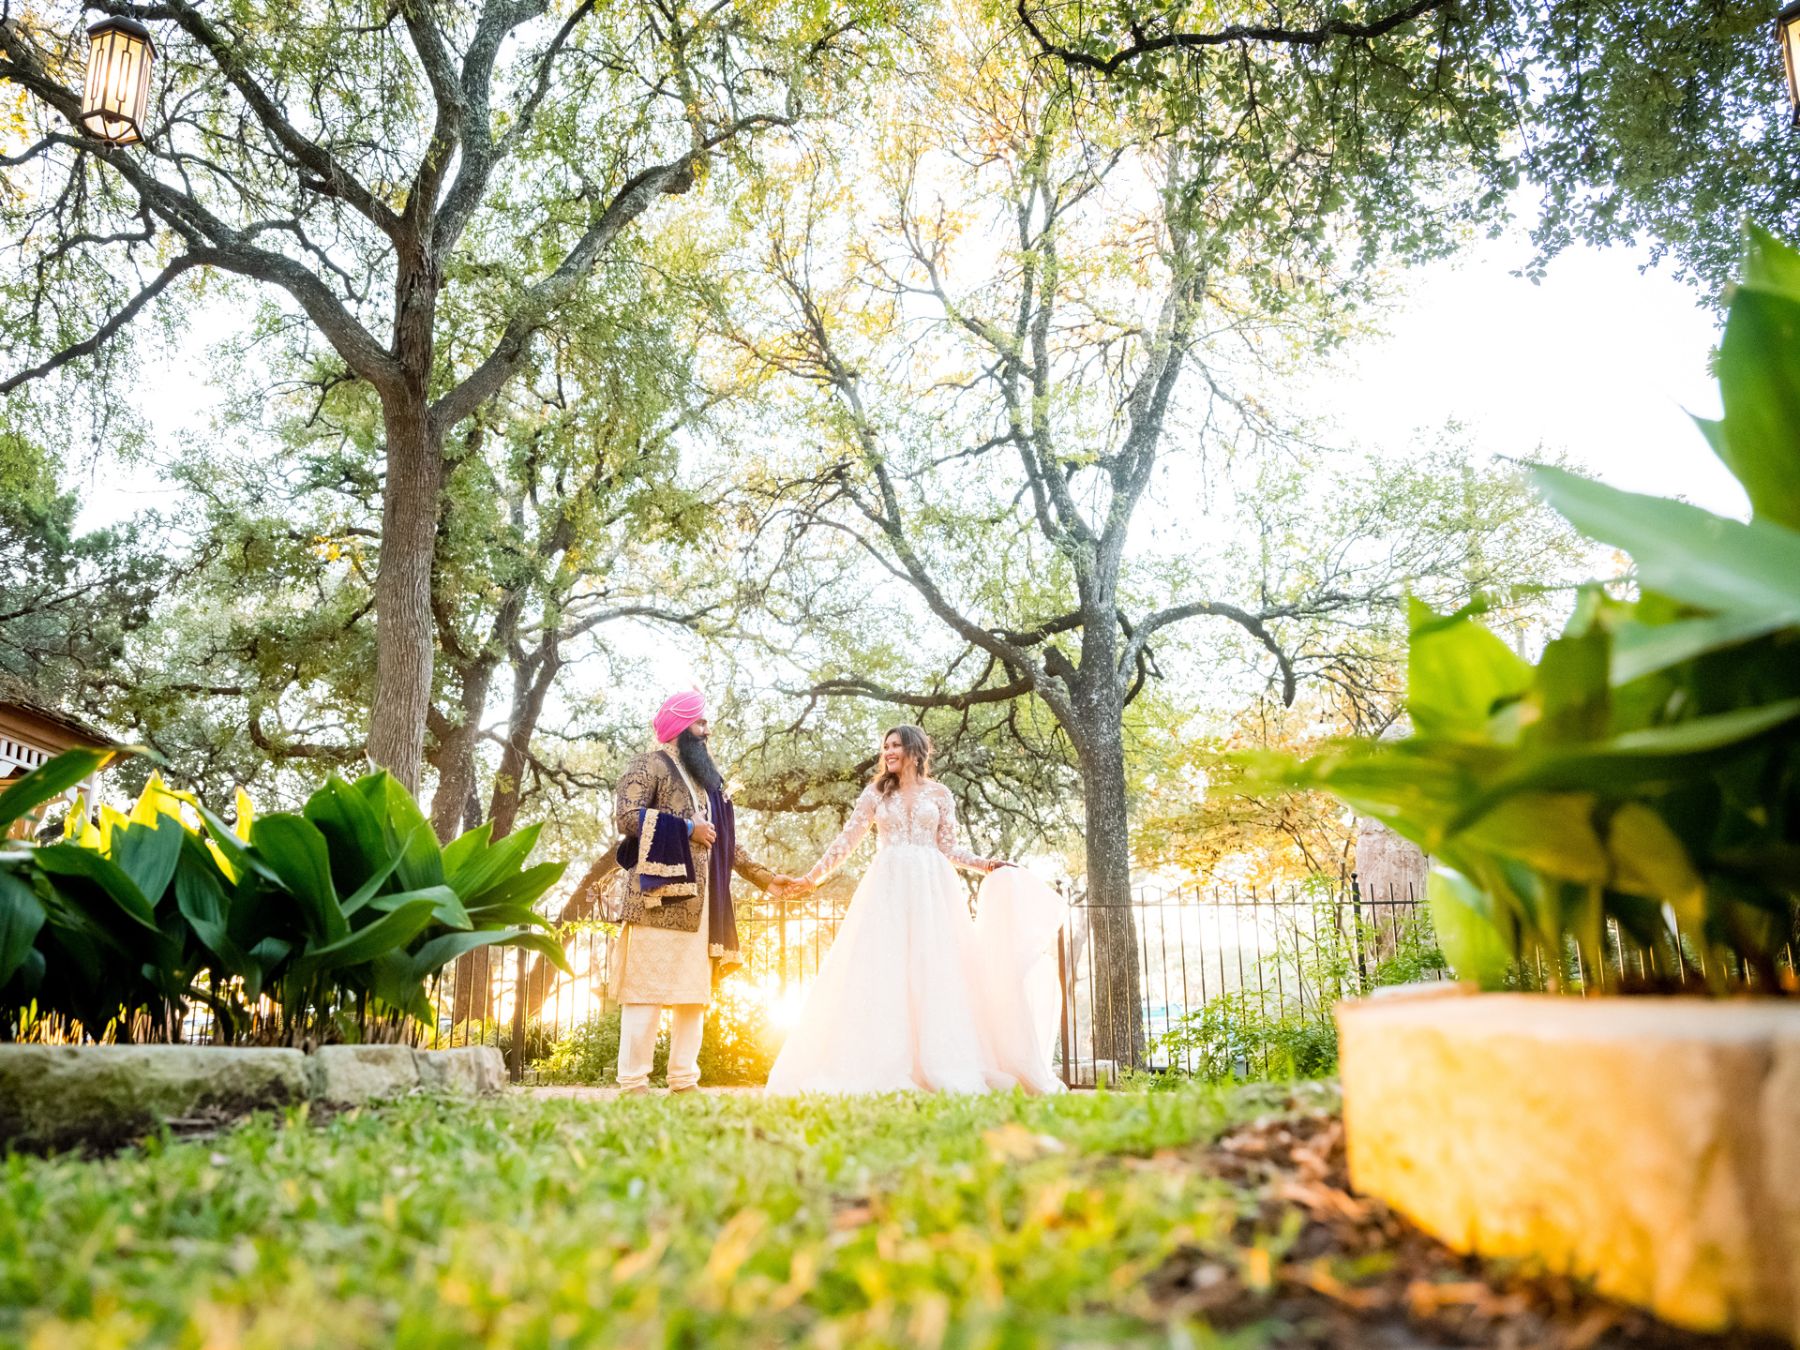 Bride and groom hold hands outdoors in a garden space with sun rays illuminating the couple.